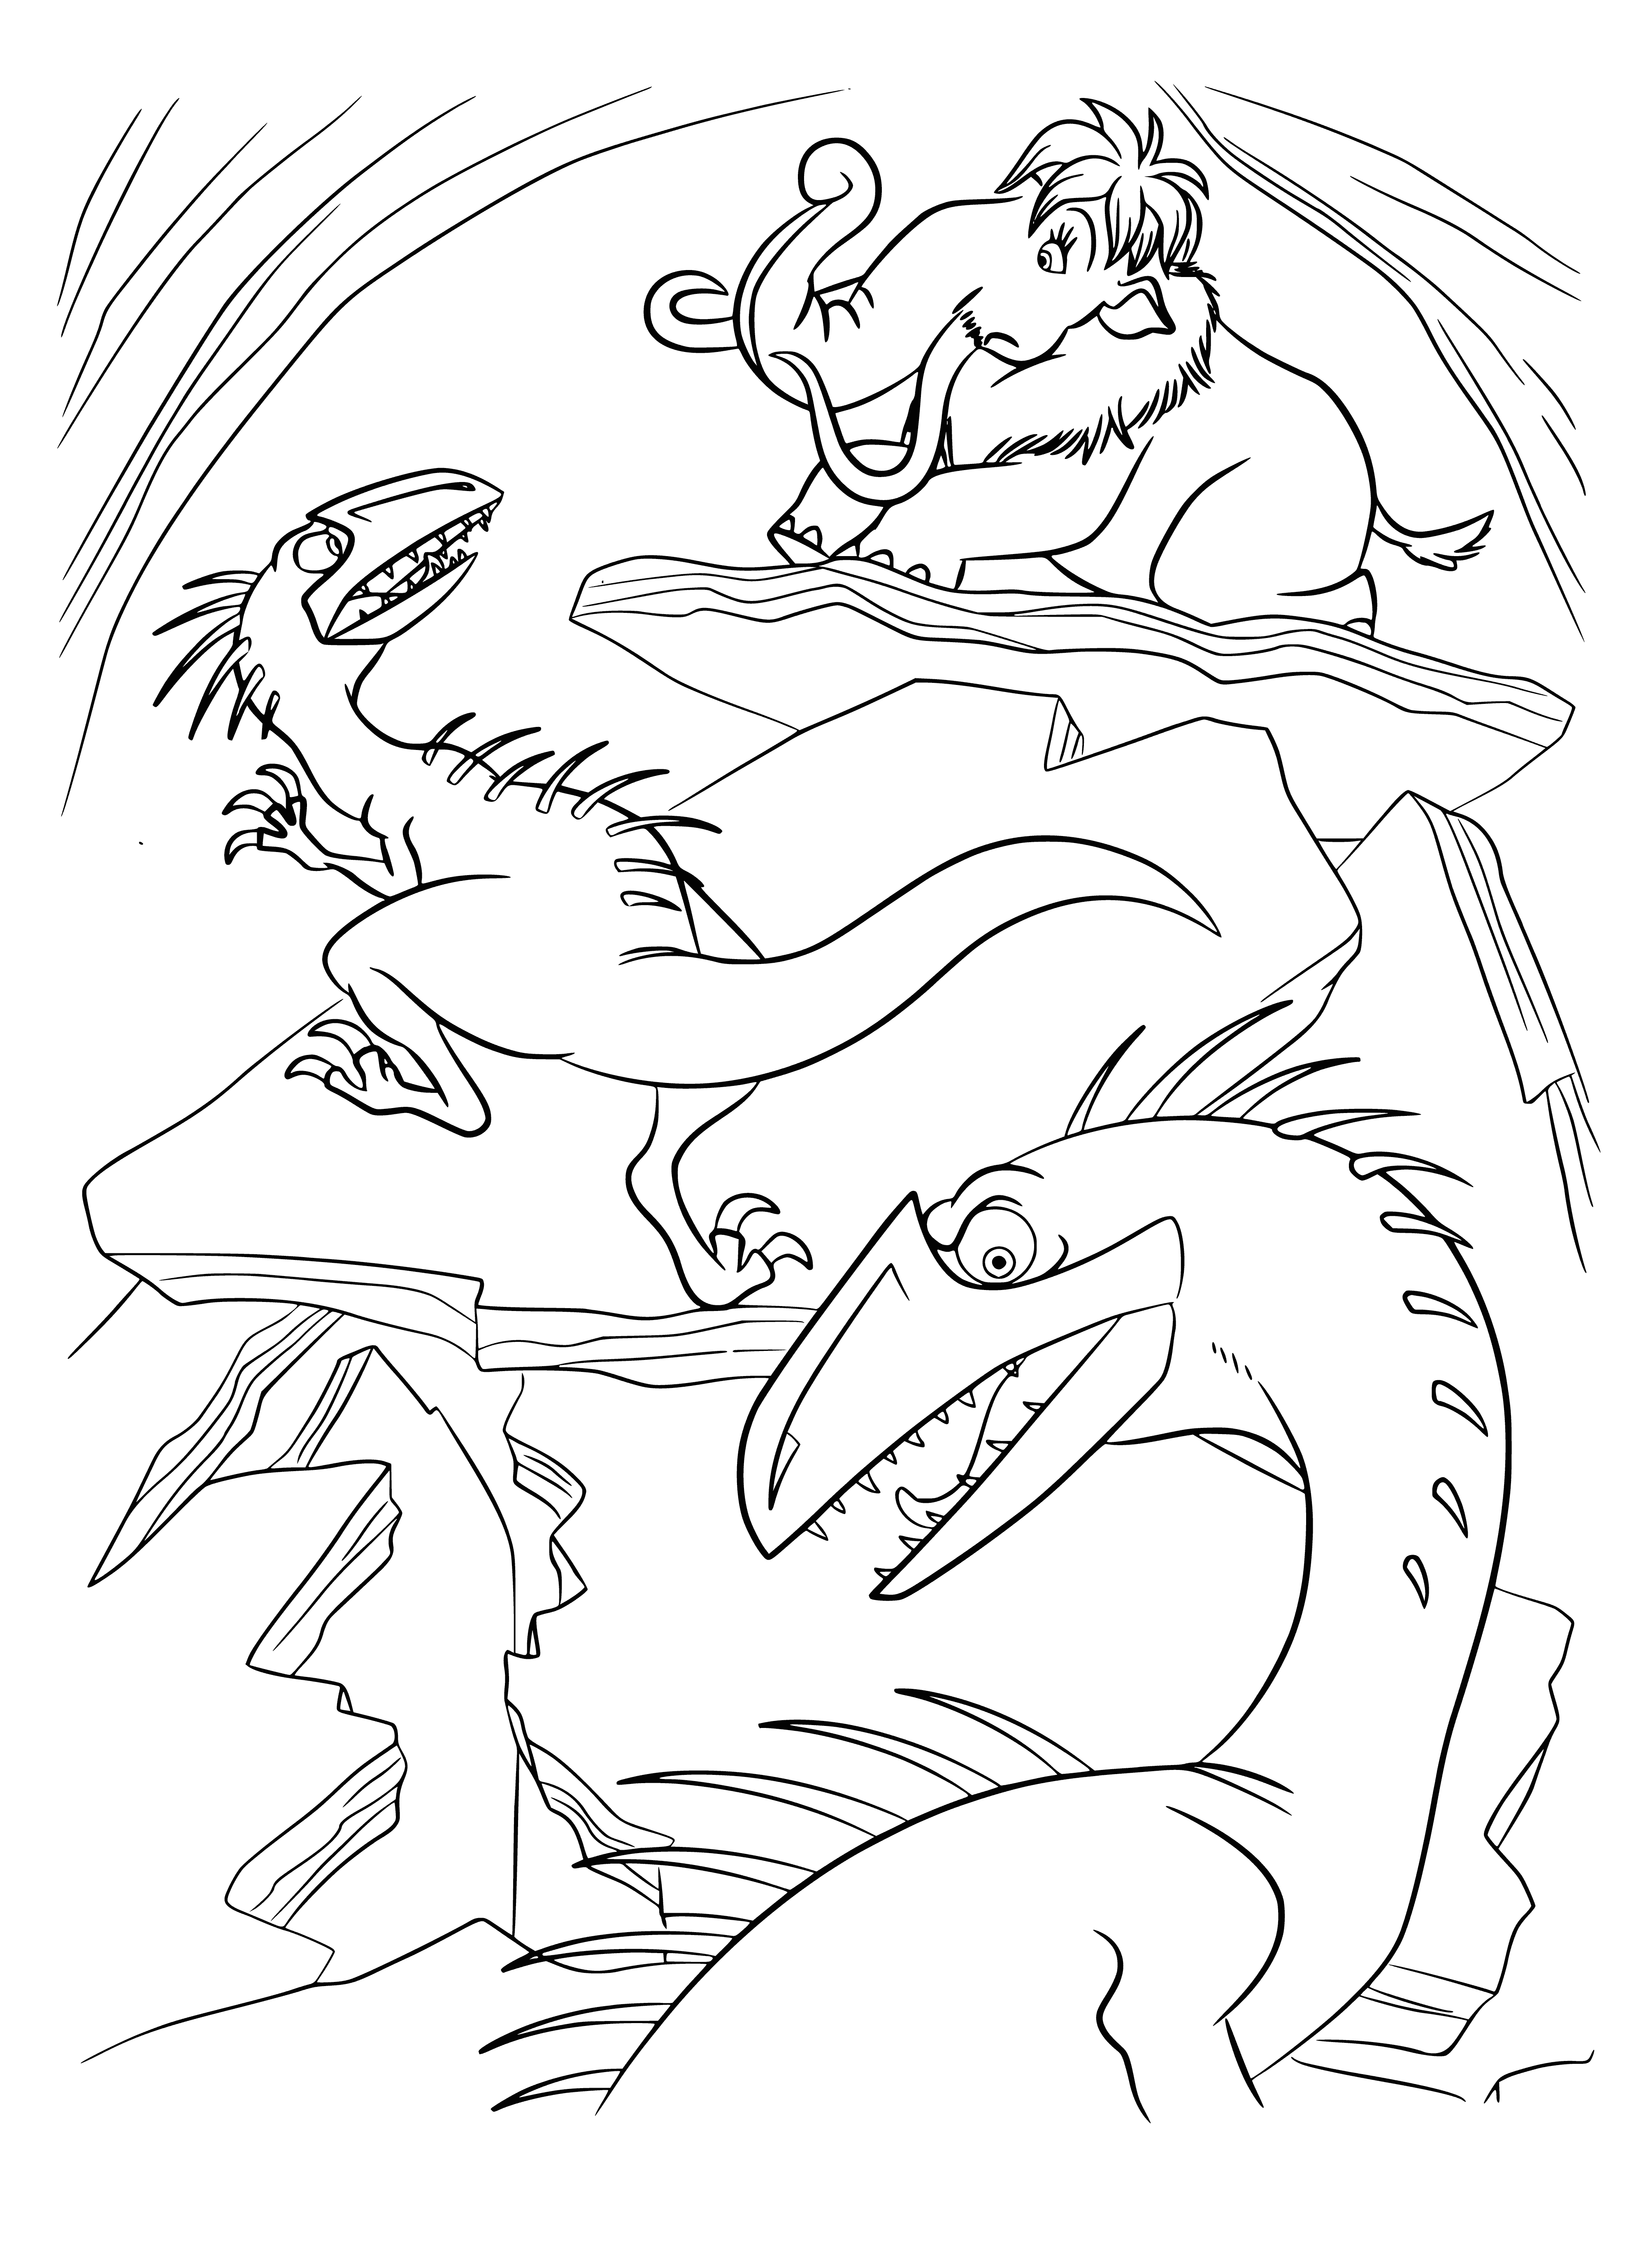 coloring page: Three angry dinosaurs in a line, with the largest in the middle, roaring.